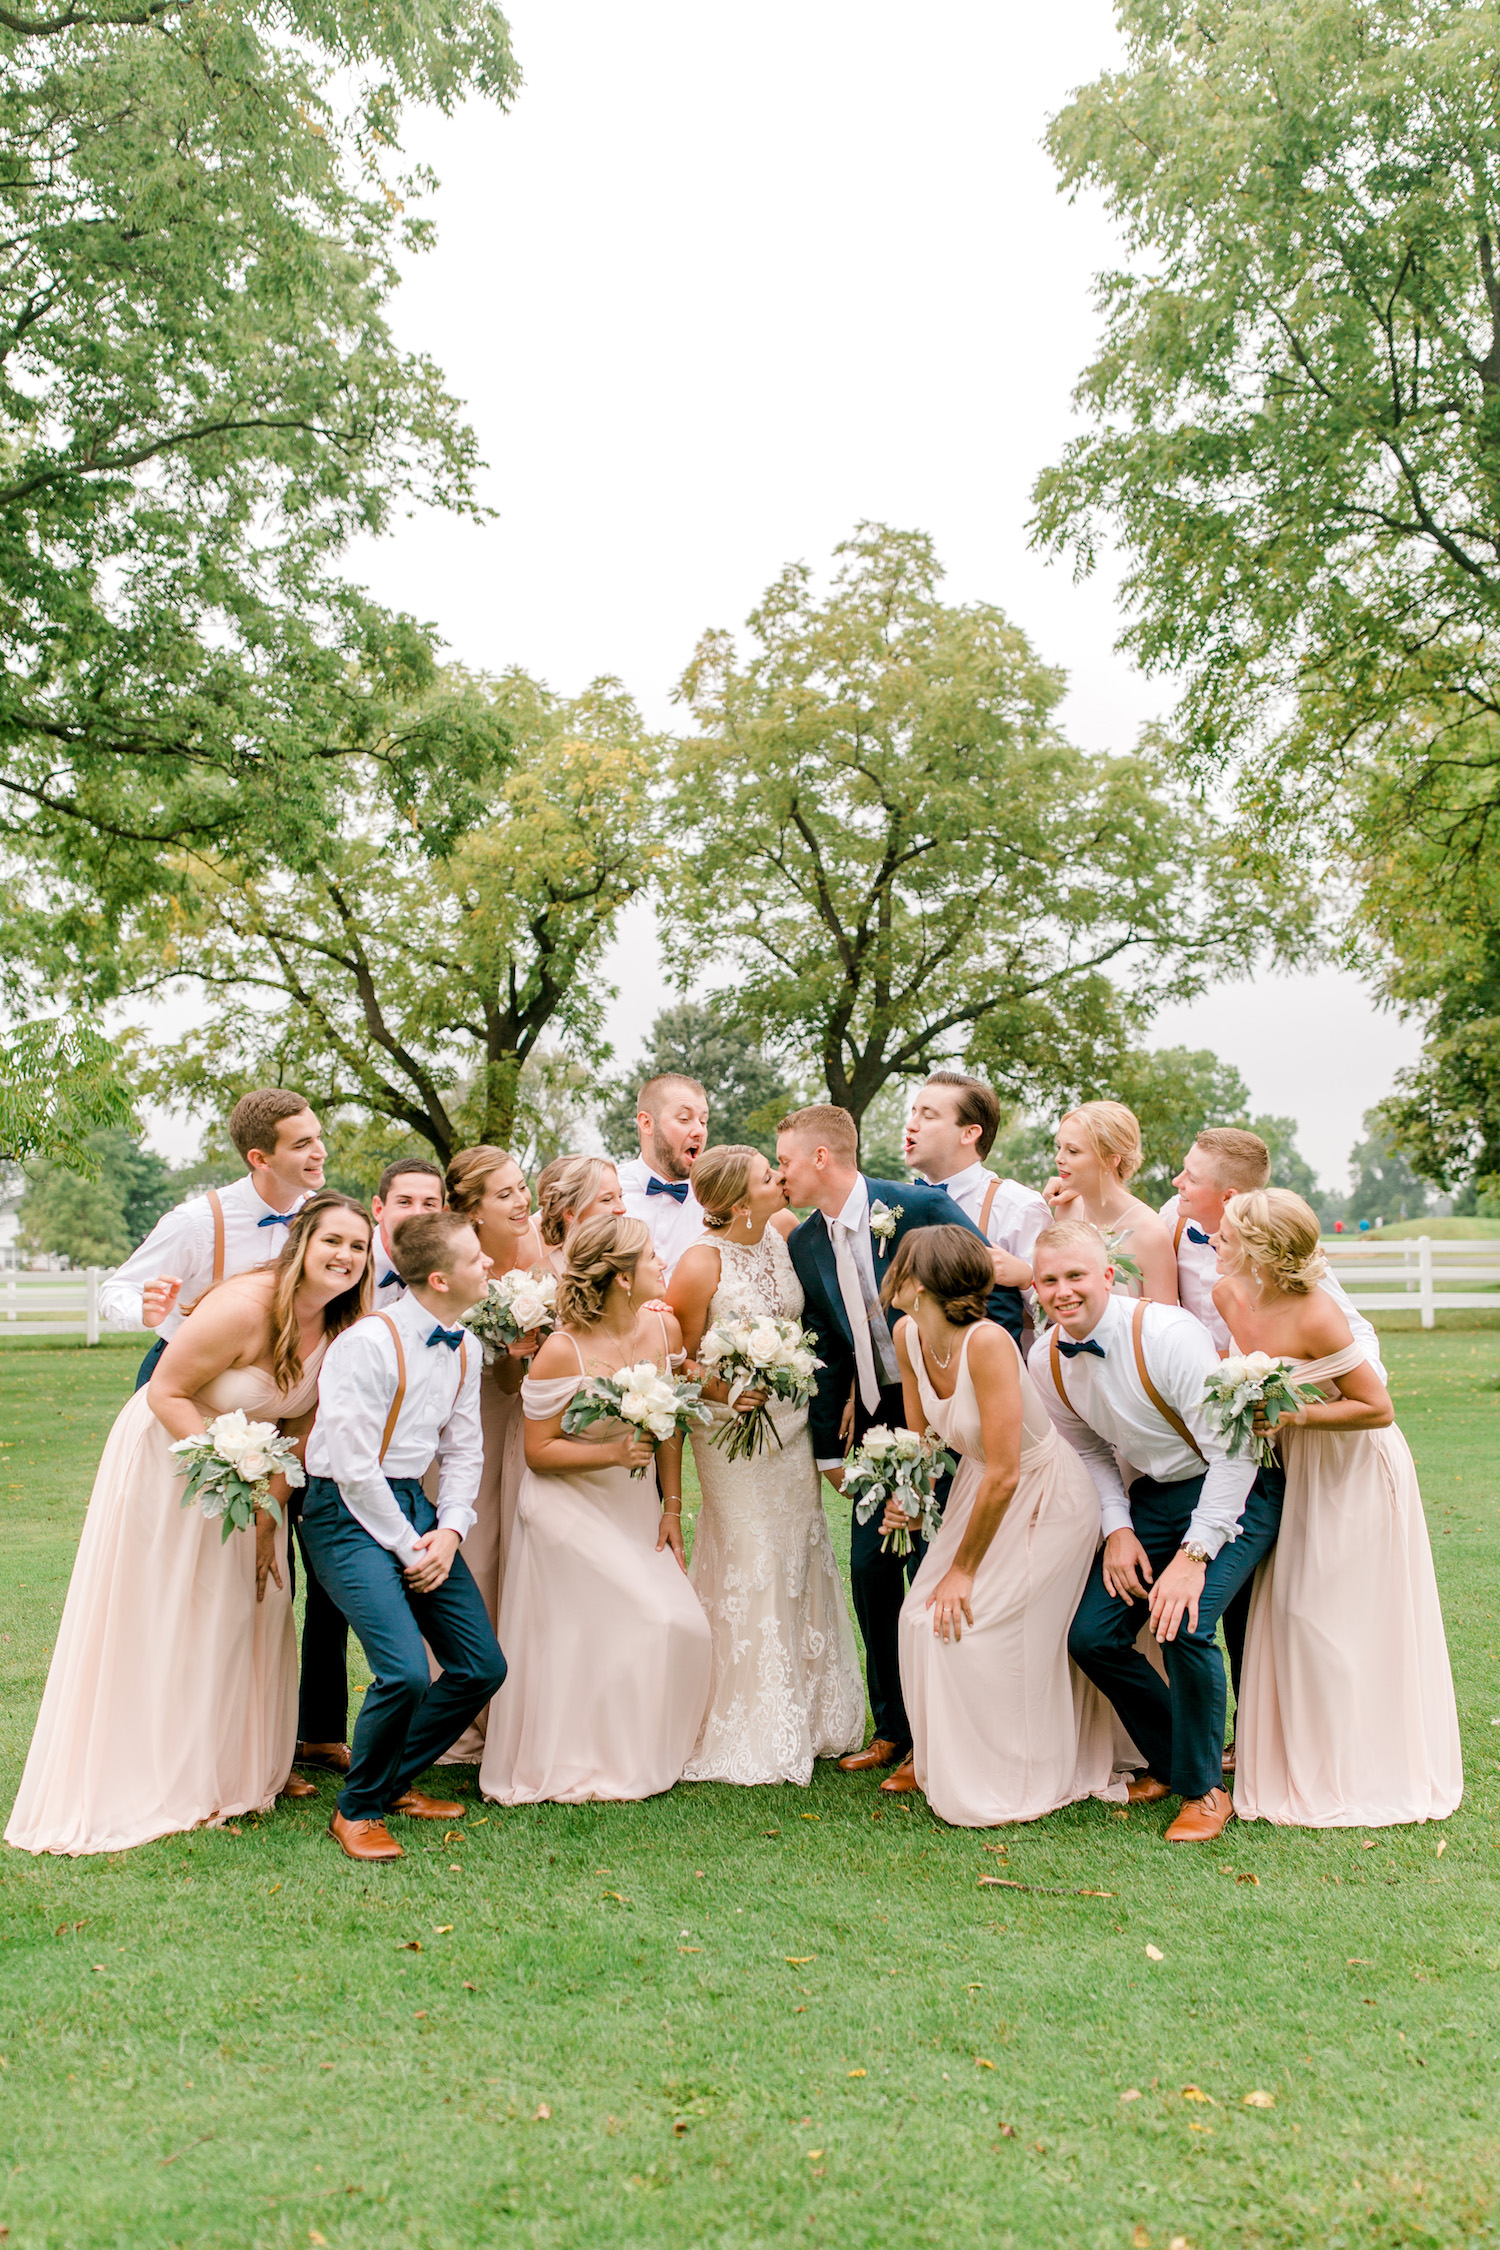 Bridal party gathering together